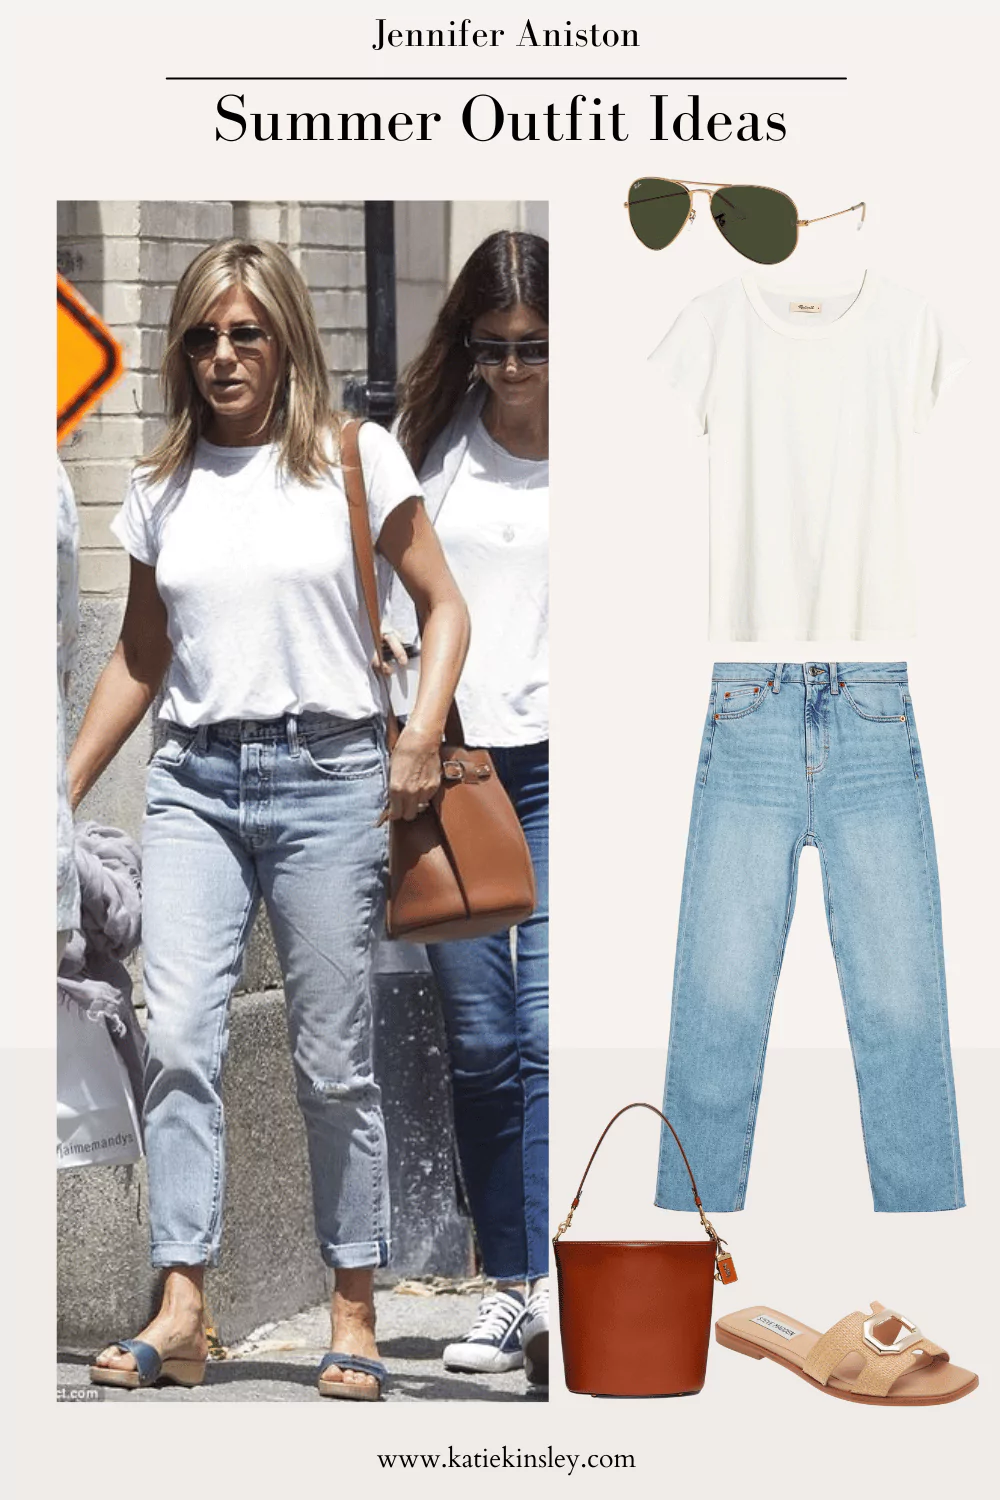 Summer Outfit ideas Jennifer Aniston Outfit 5